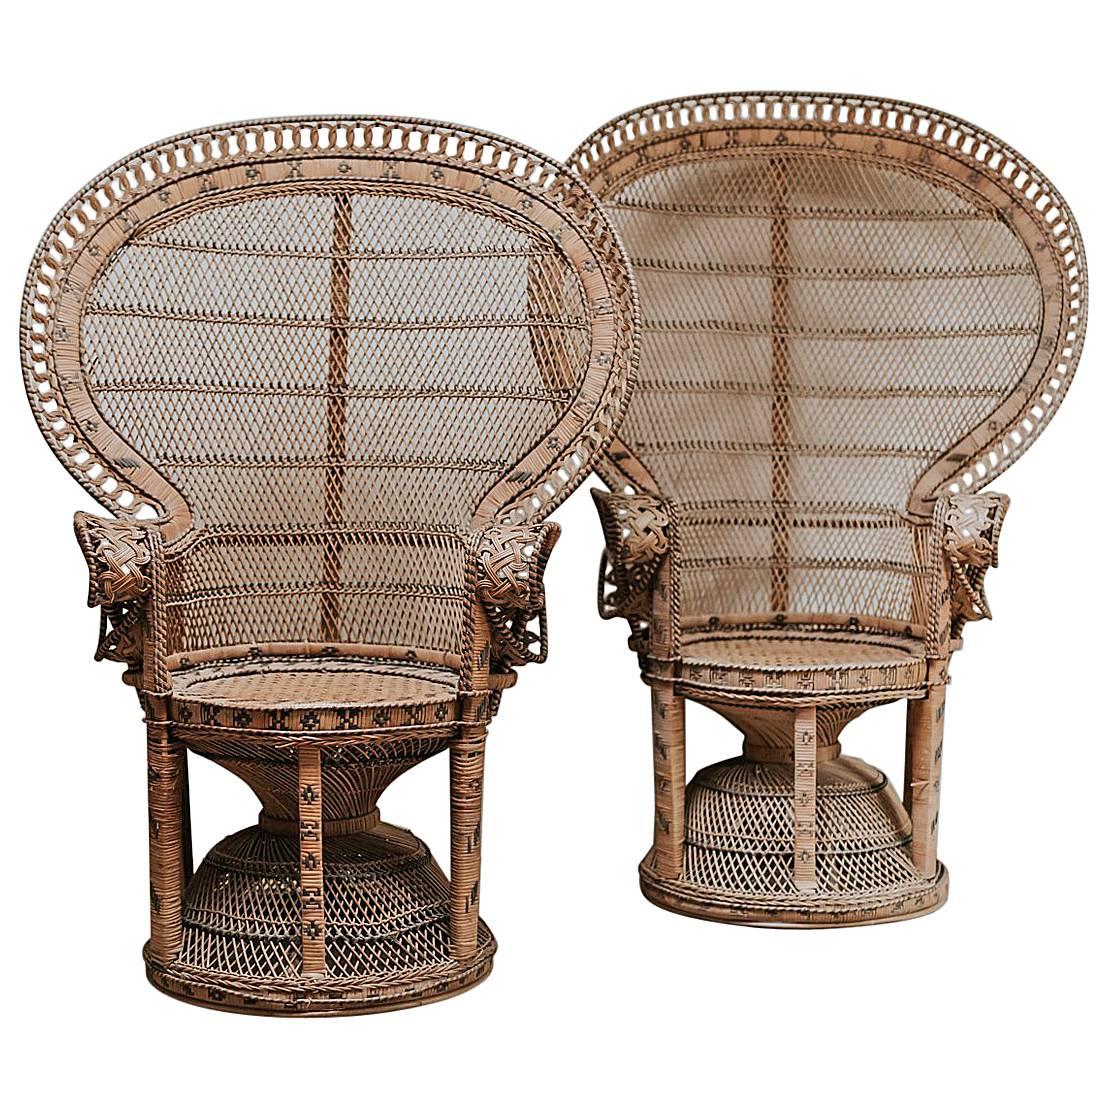 1970s Wicker Peacock Chairs